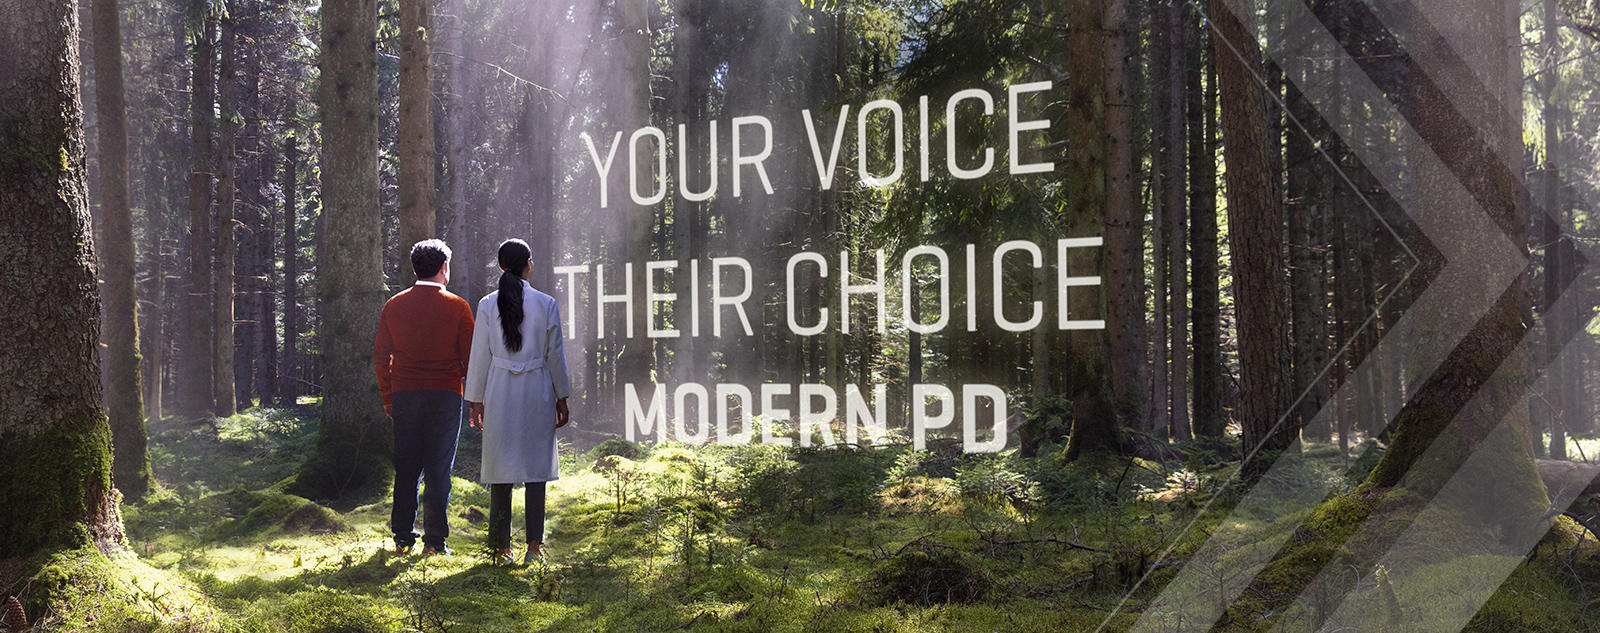 'Your voice. Their choice. Modern PD' graphic